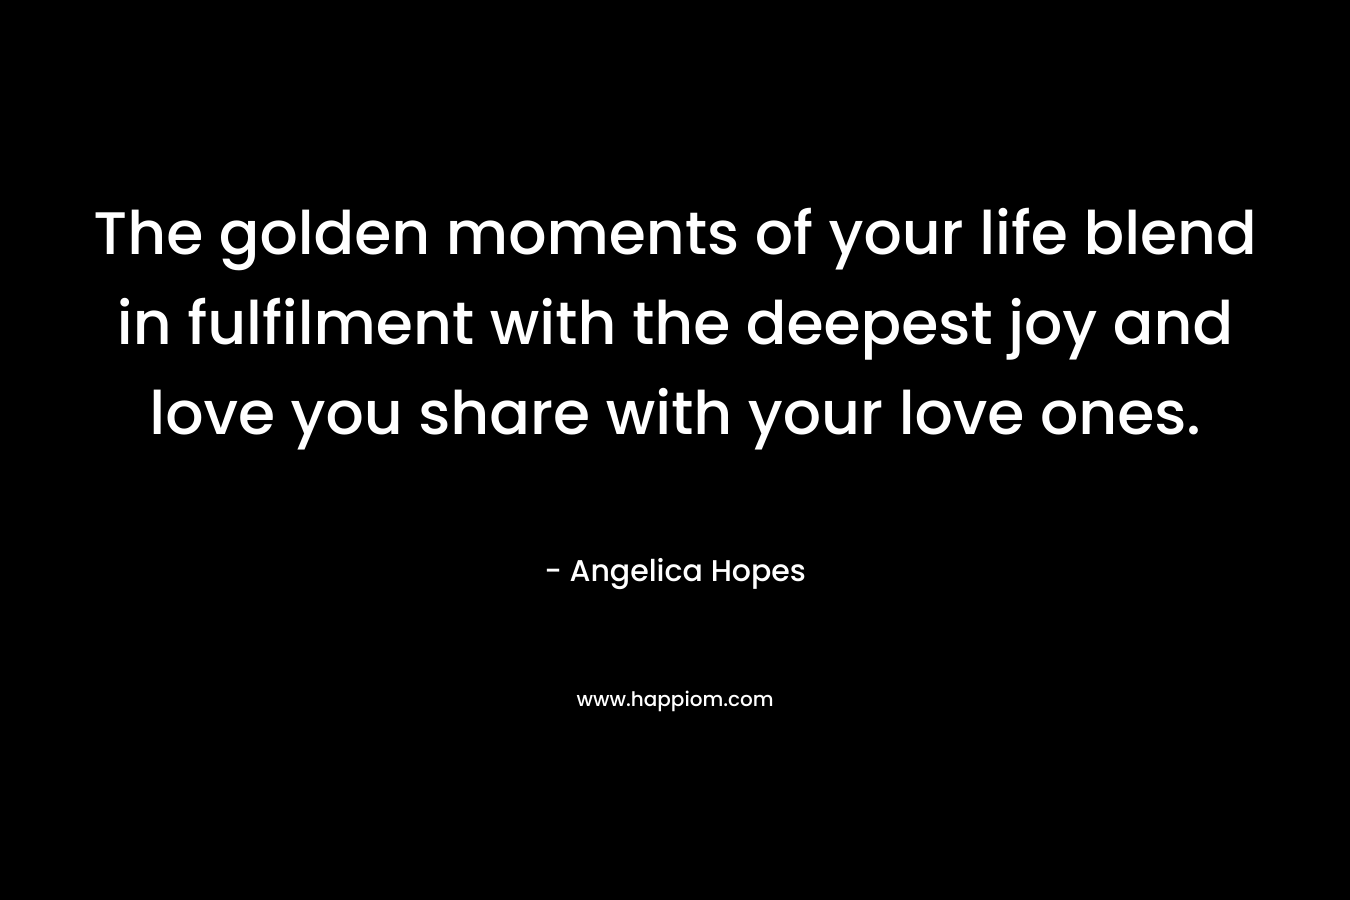 The golden moments of your life blend in fulfilment with the deepest joy and love you share with your love ones.